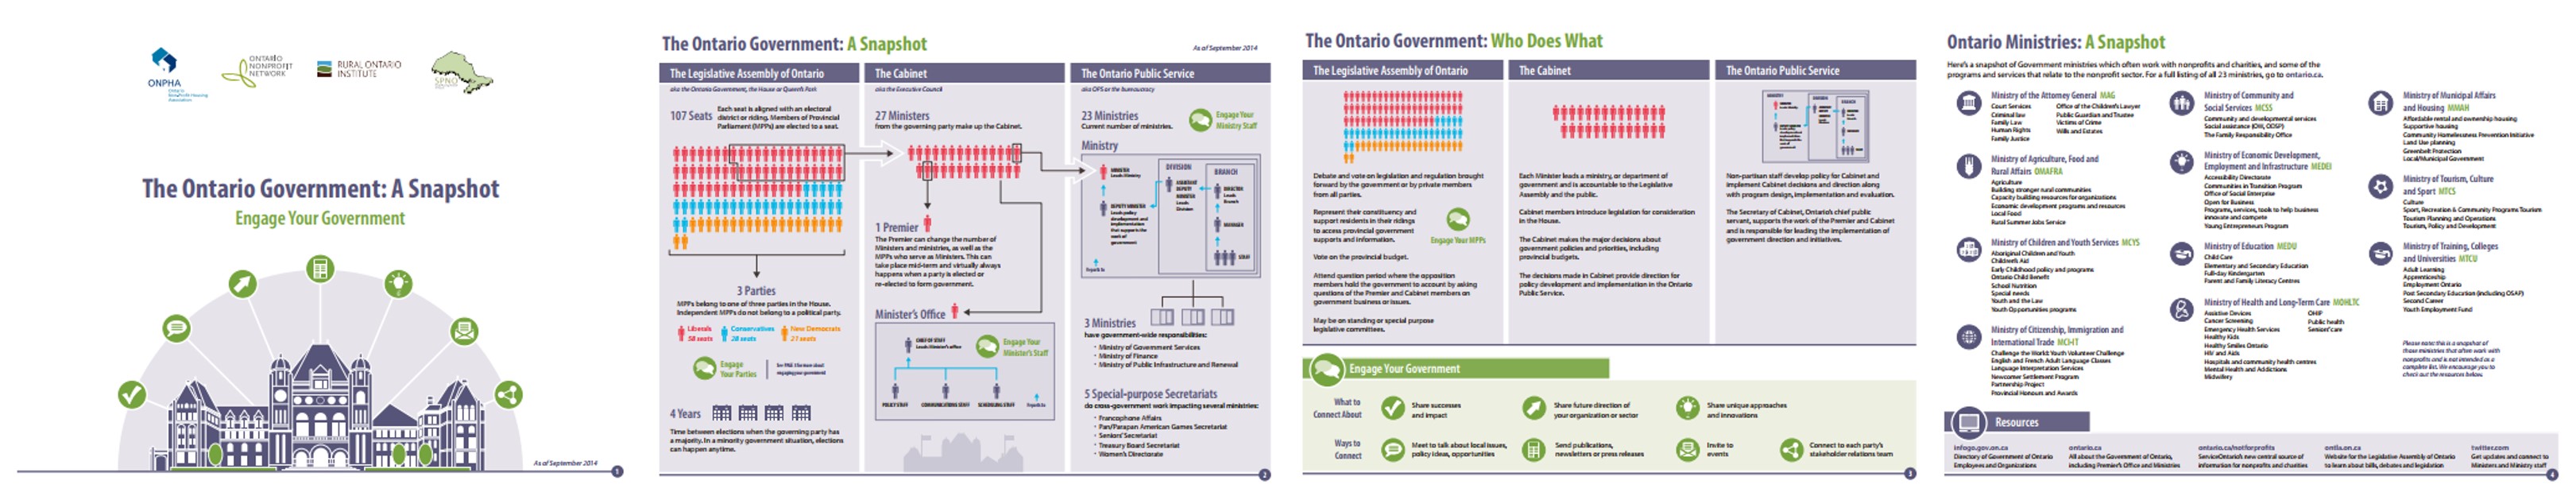 The Ontario Government: A Snapshot, an Infographic from the Ontario Nonprofit Network